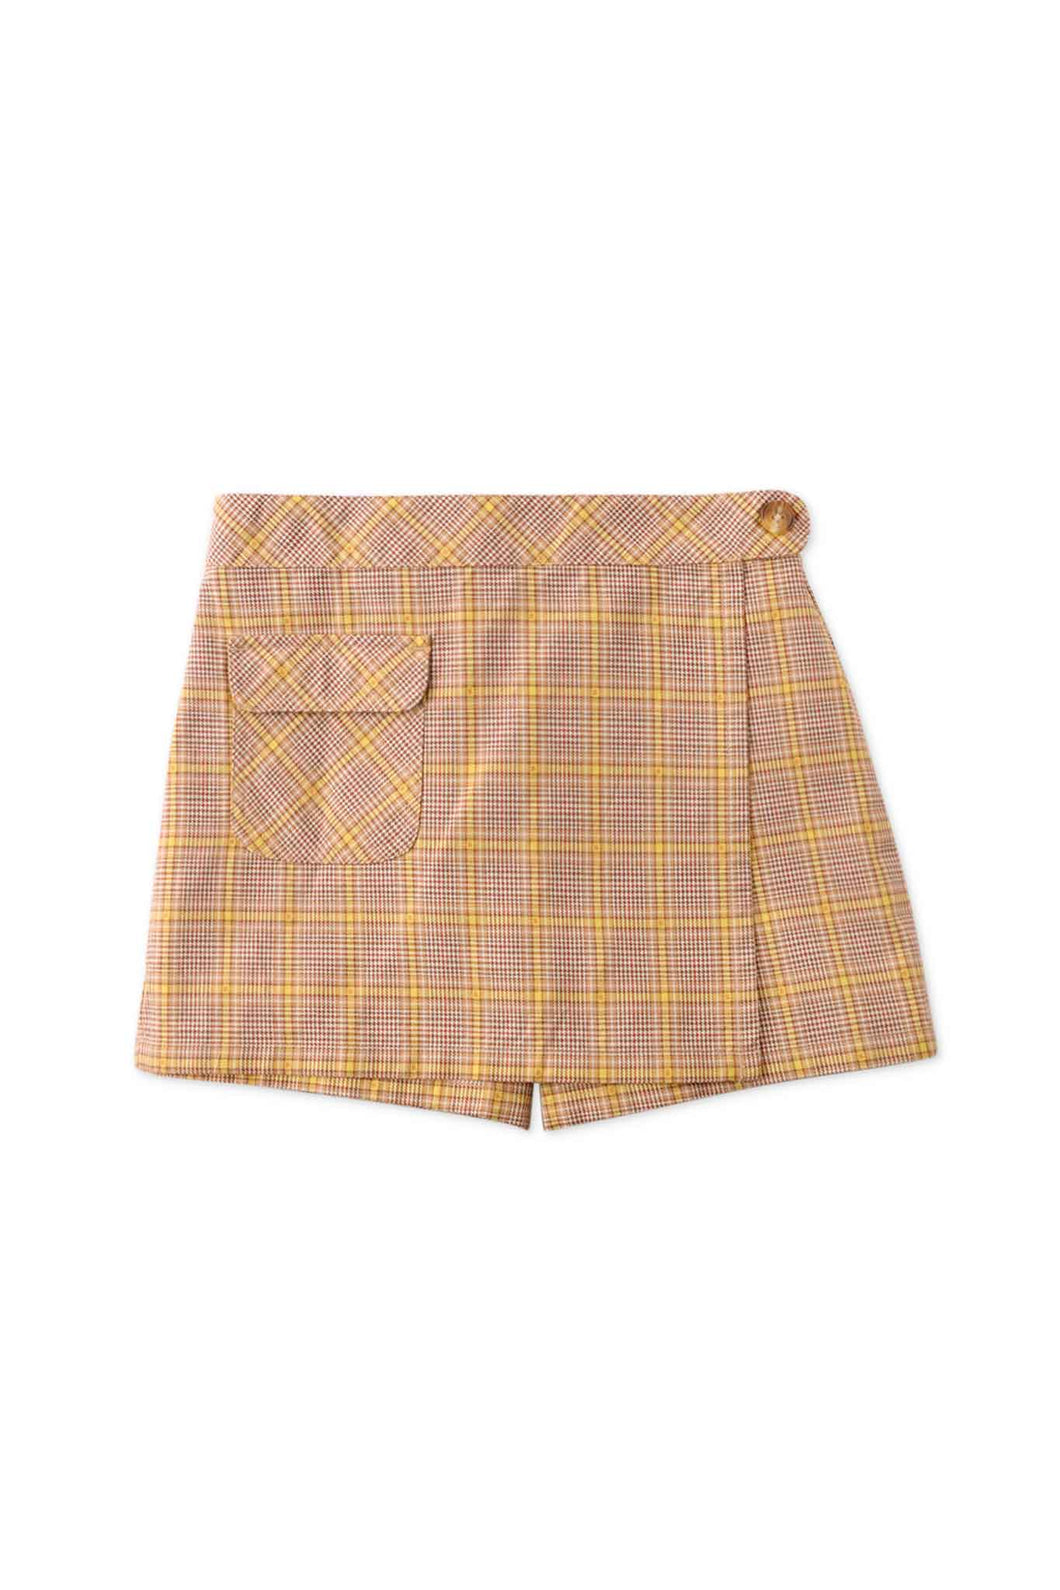 Gingersnaps Houndstooth Skorts with Patch Pocket